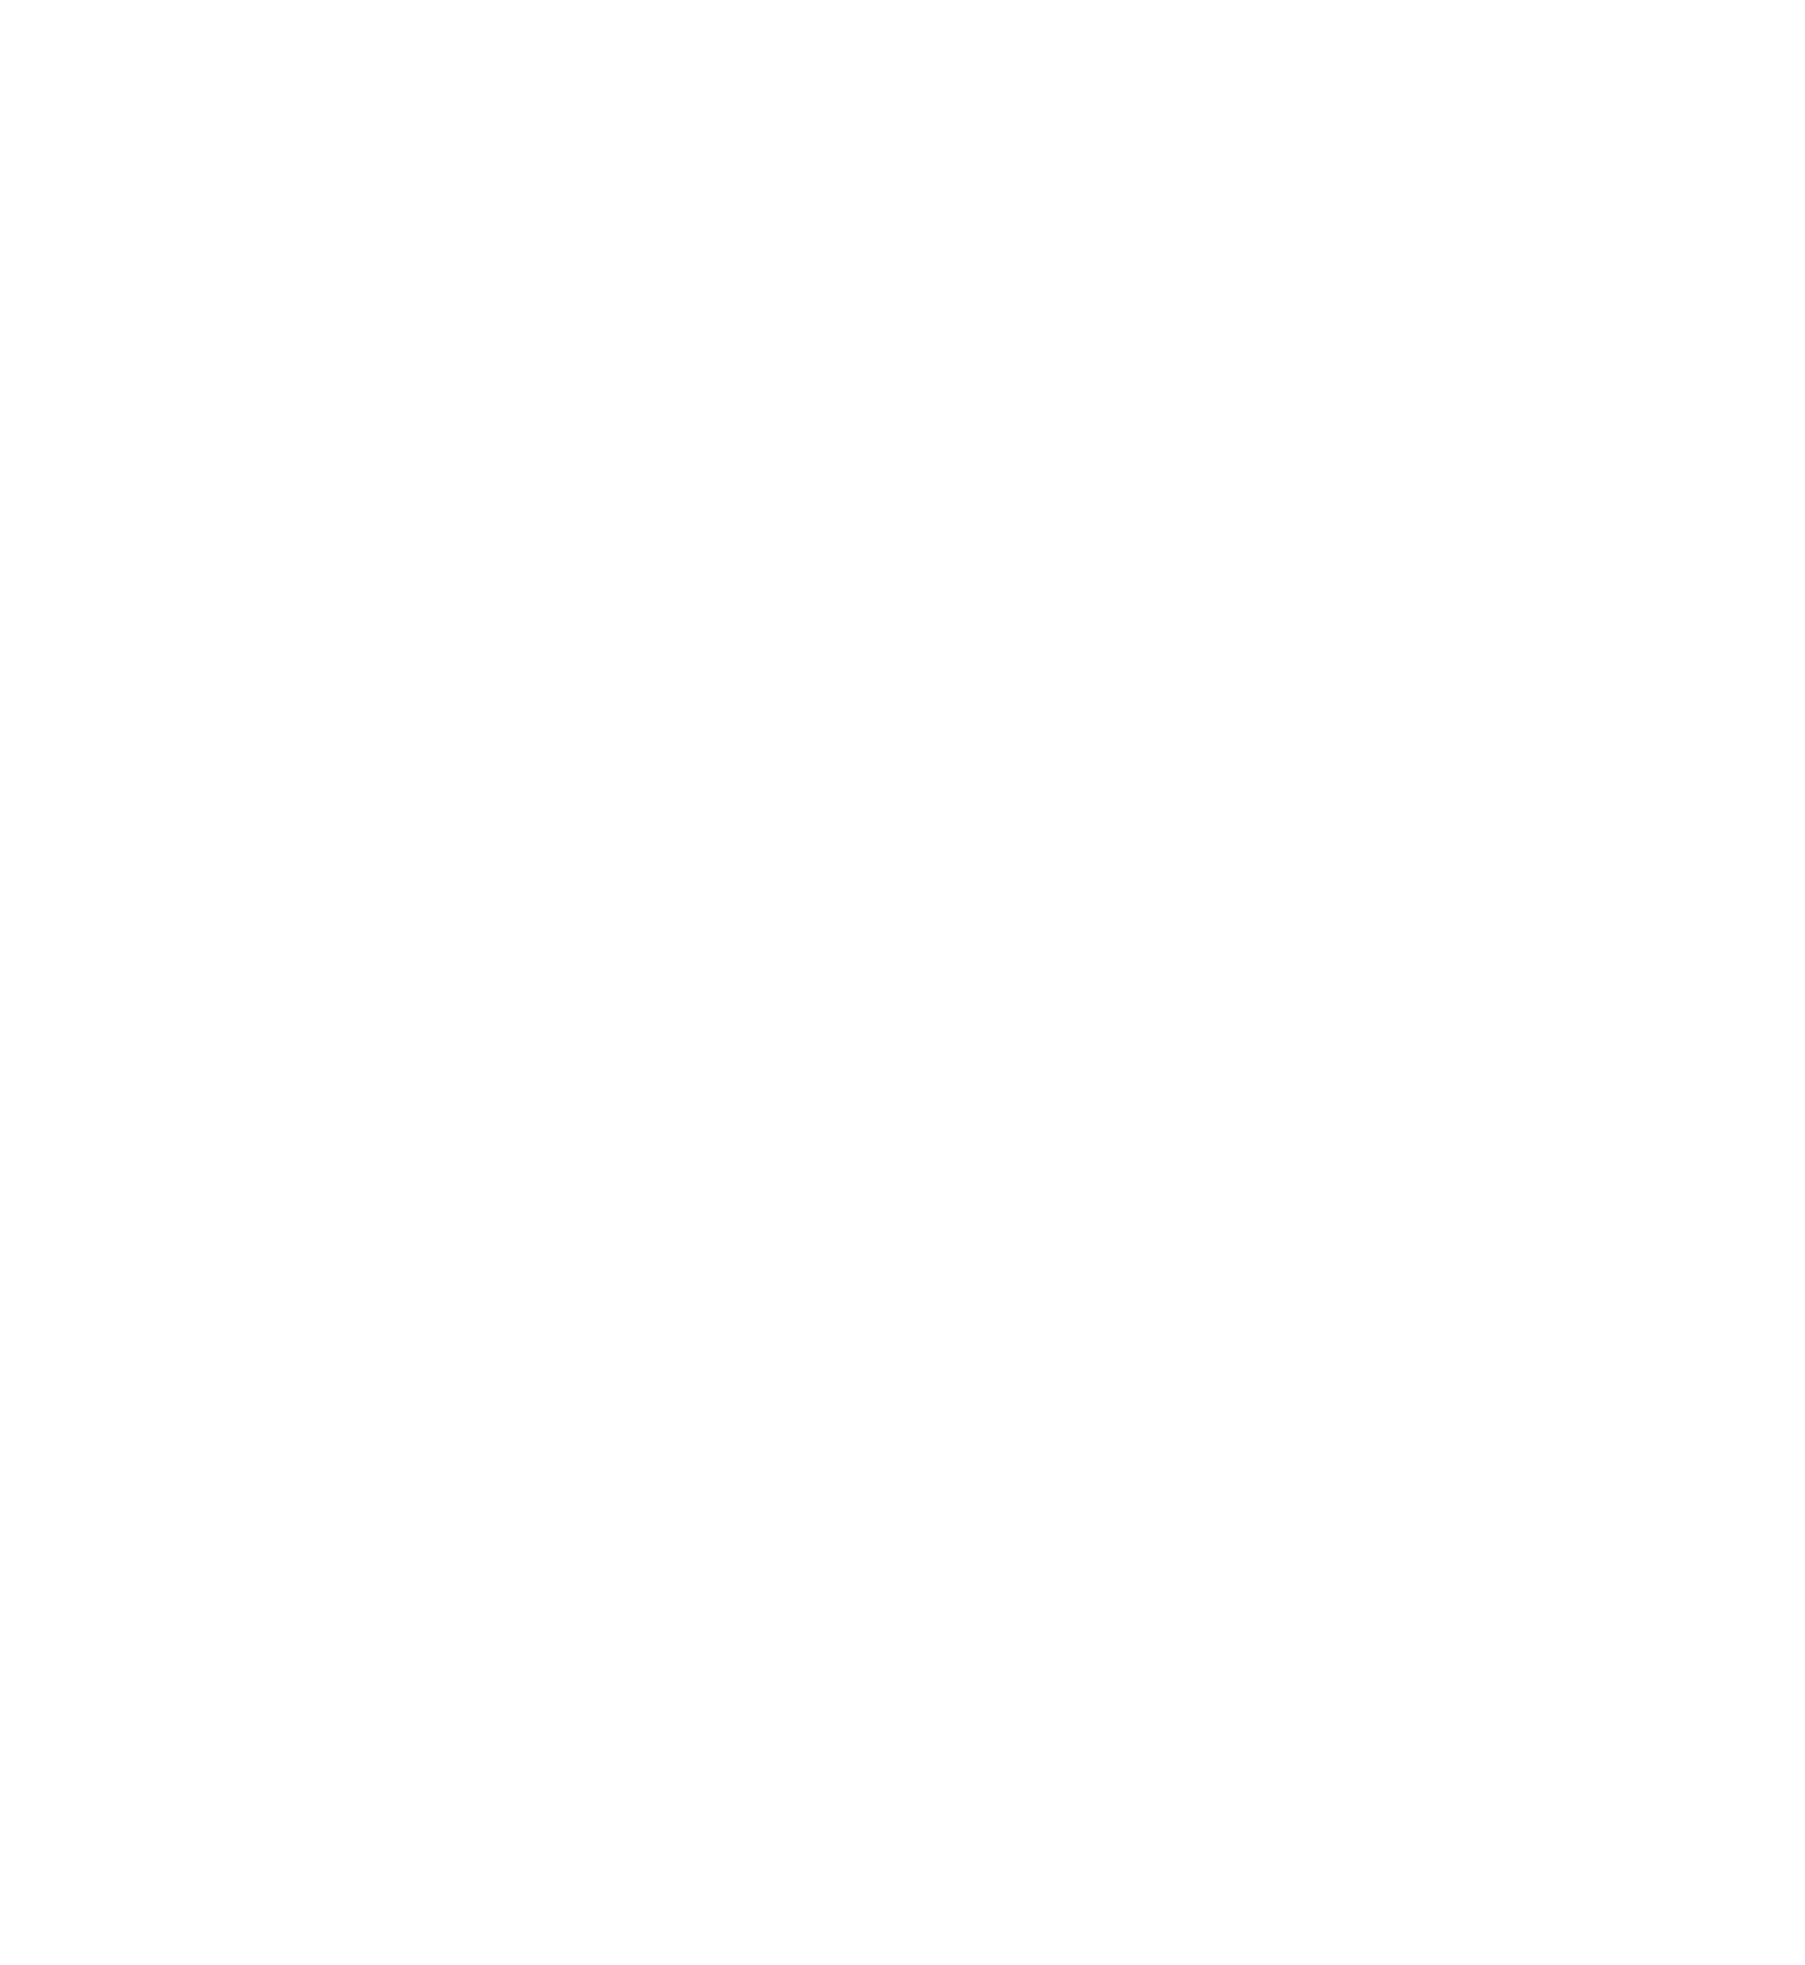 Welcome to the Den